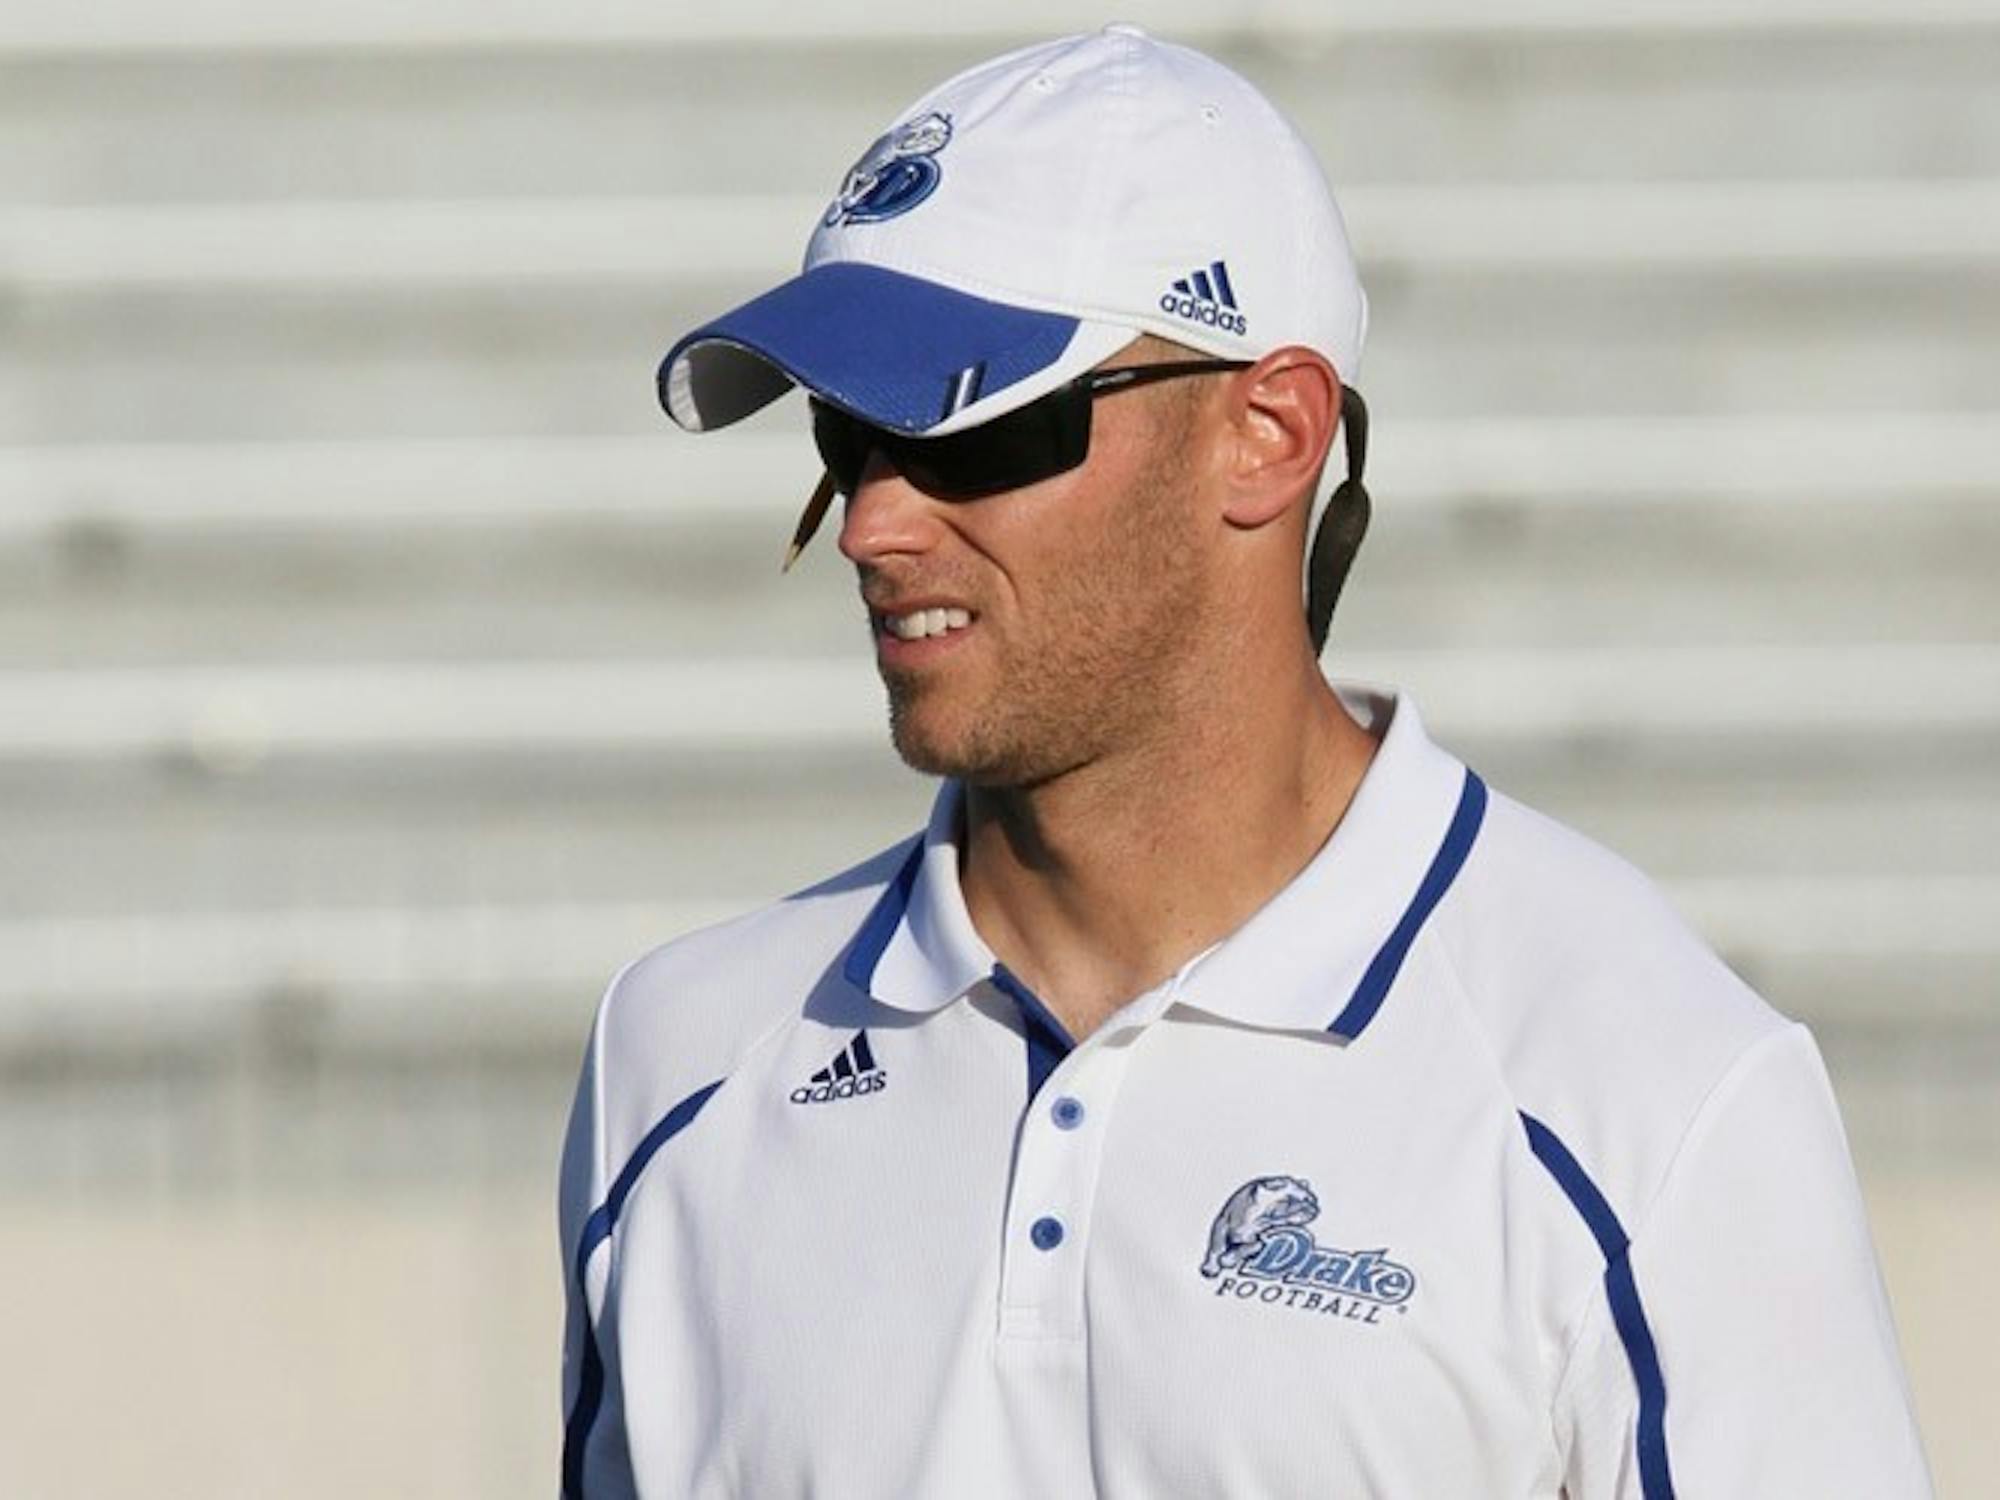 	Eastern Michigan University hired Todd Frakes to be secondary coach. He previously held the roles of defensive backs coach and recruiting coordinator at Drake University, under Chris Creighton.